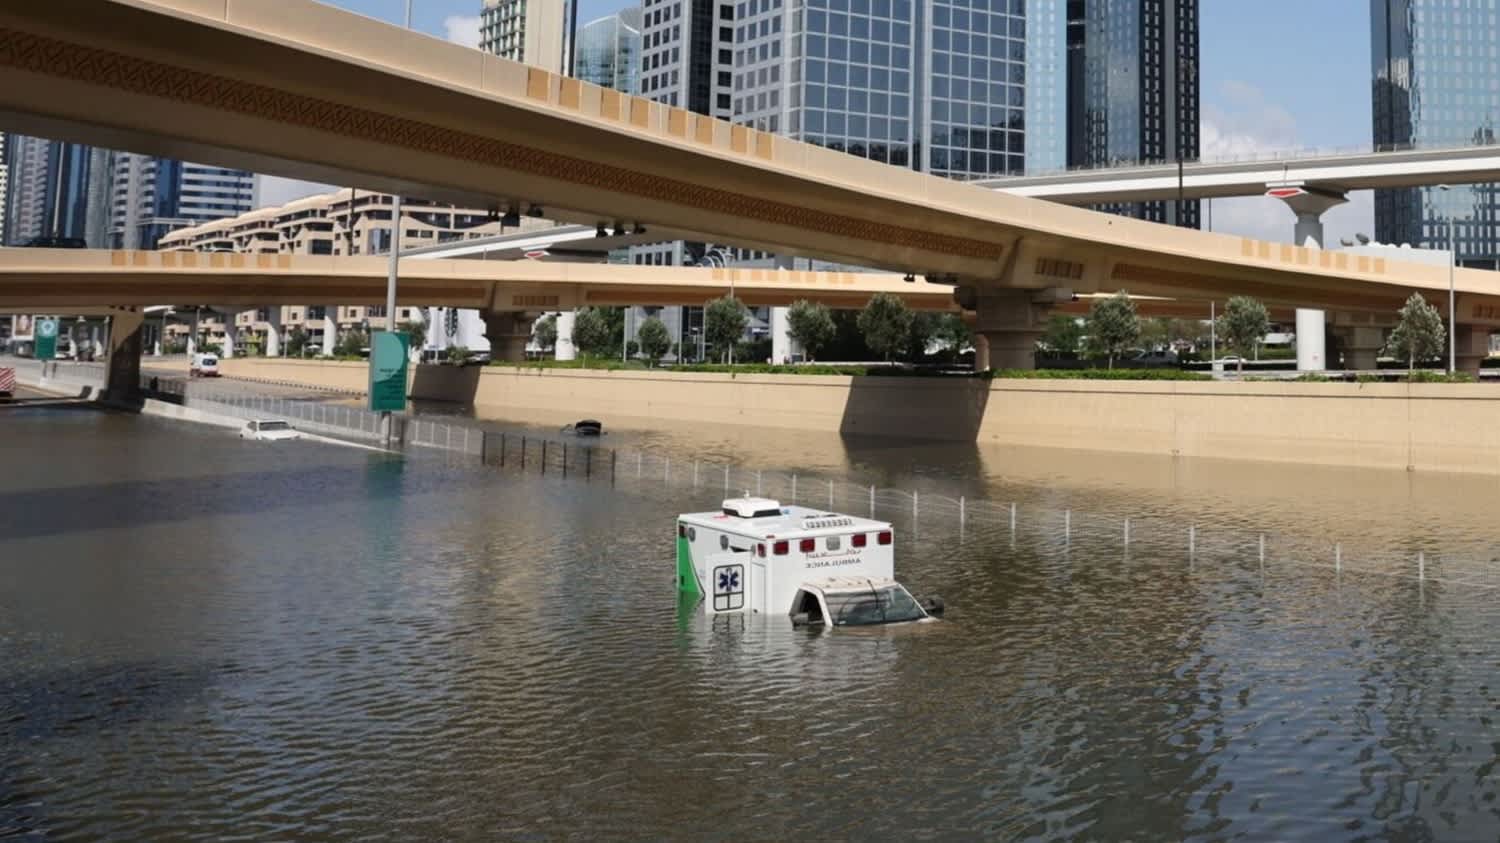 An abandoned ambulance submerged in flood water on a highway after a rainstorm in Dubai, United Arab Emirates